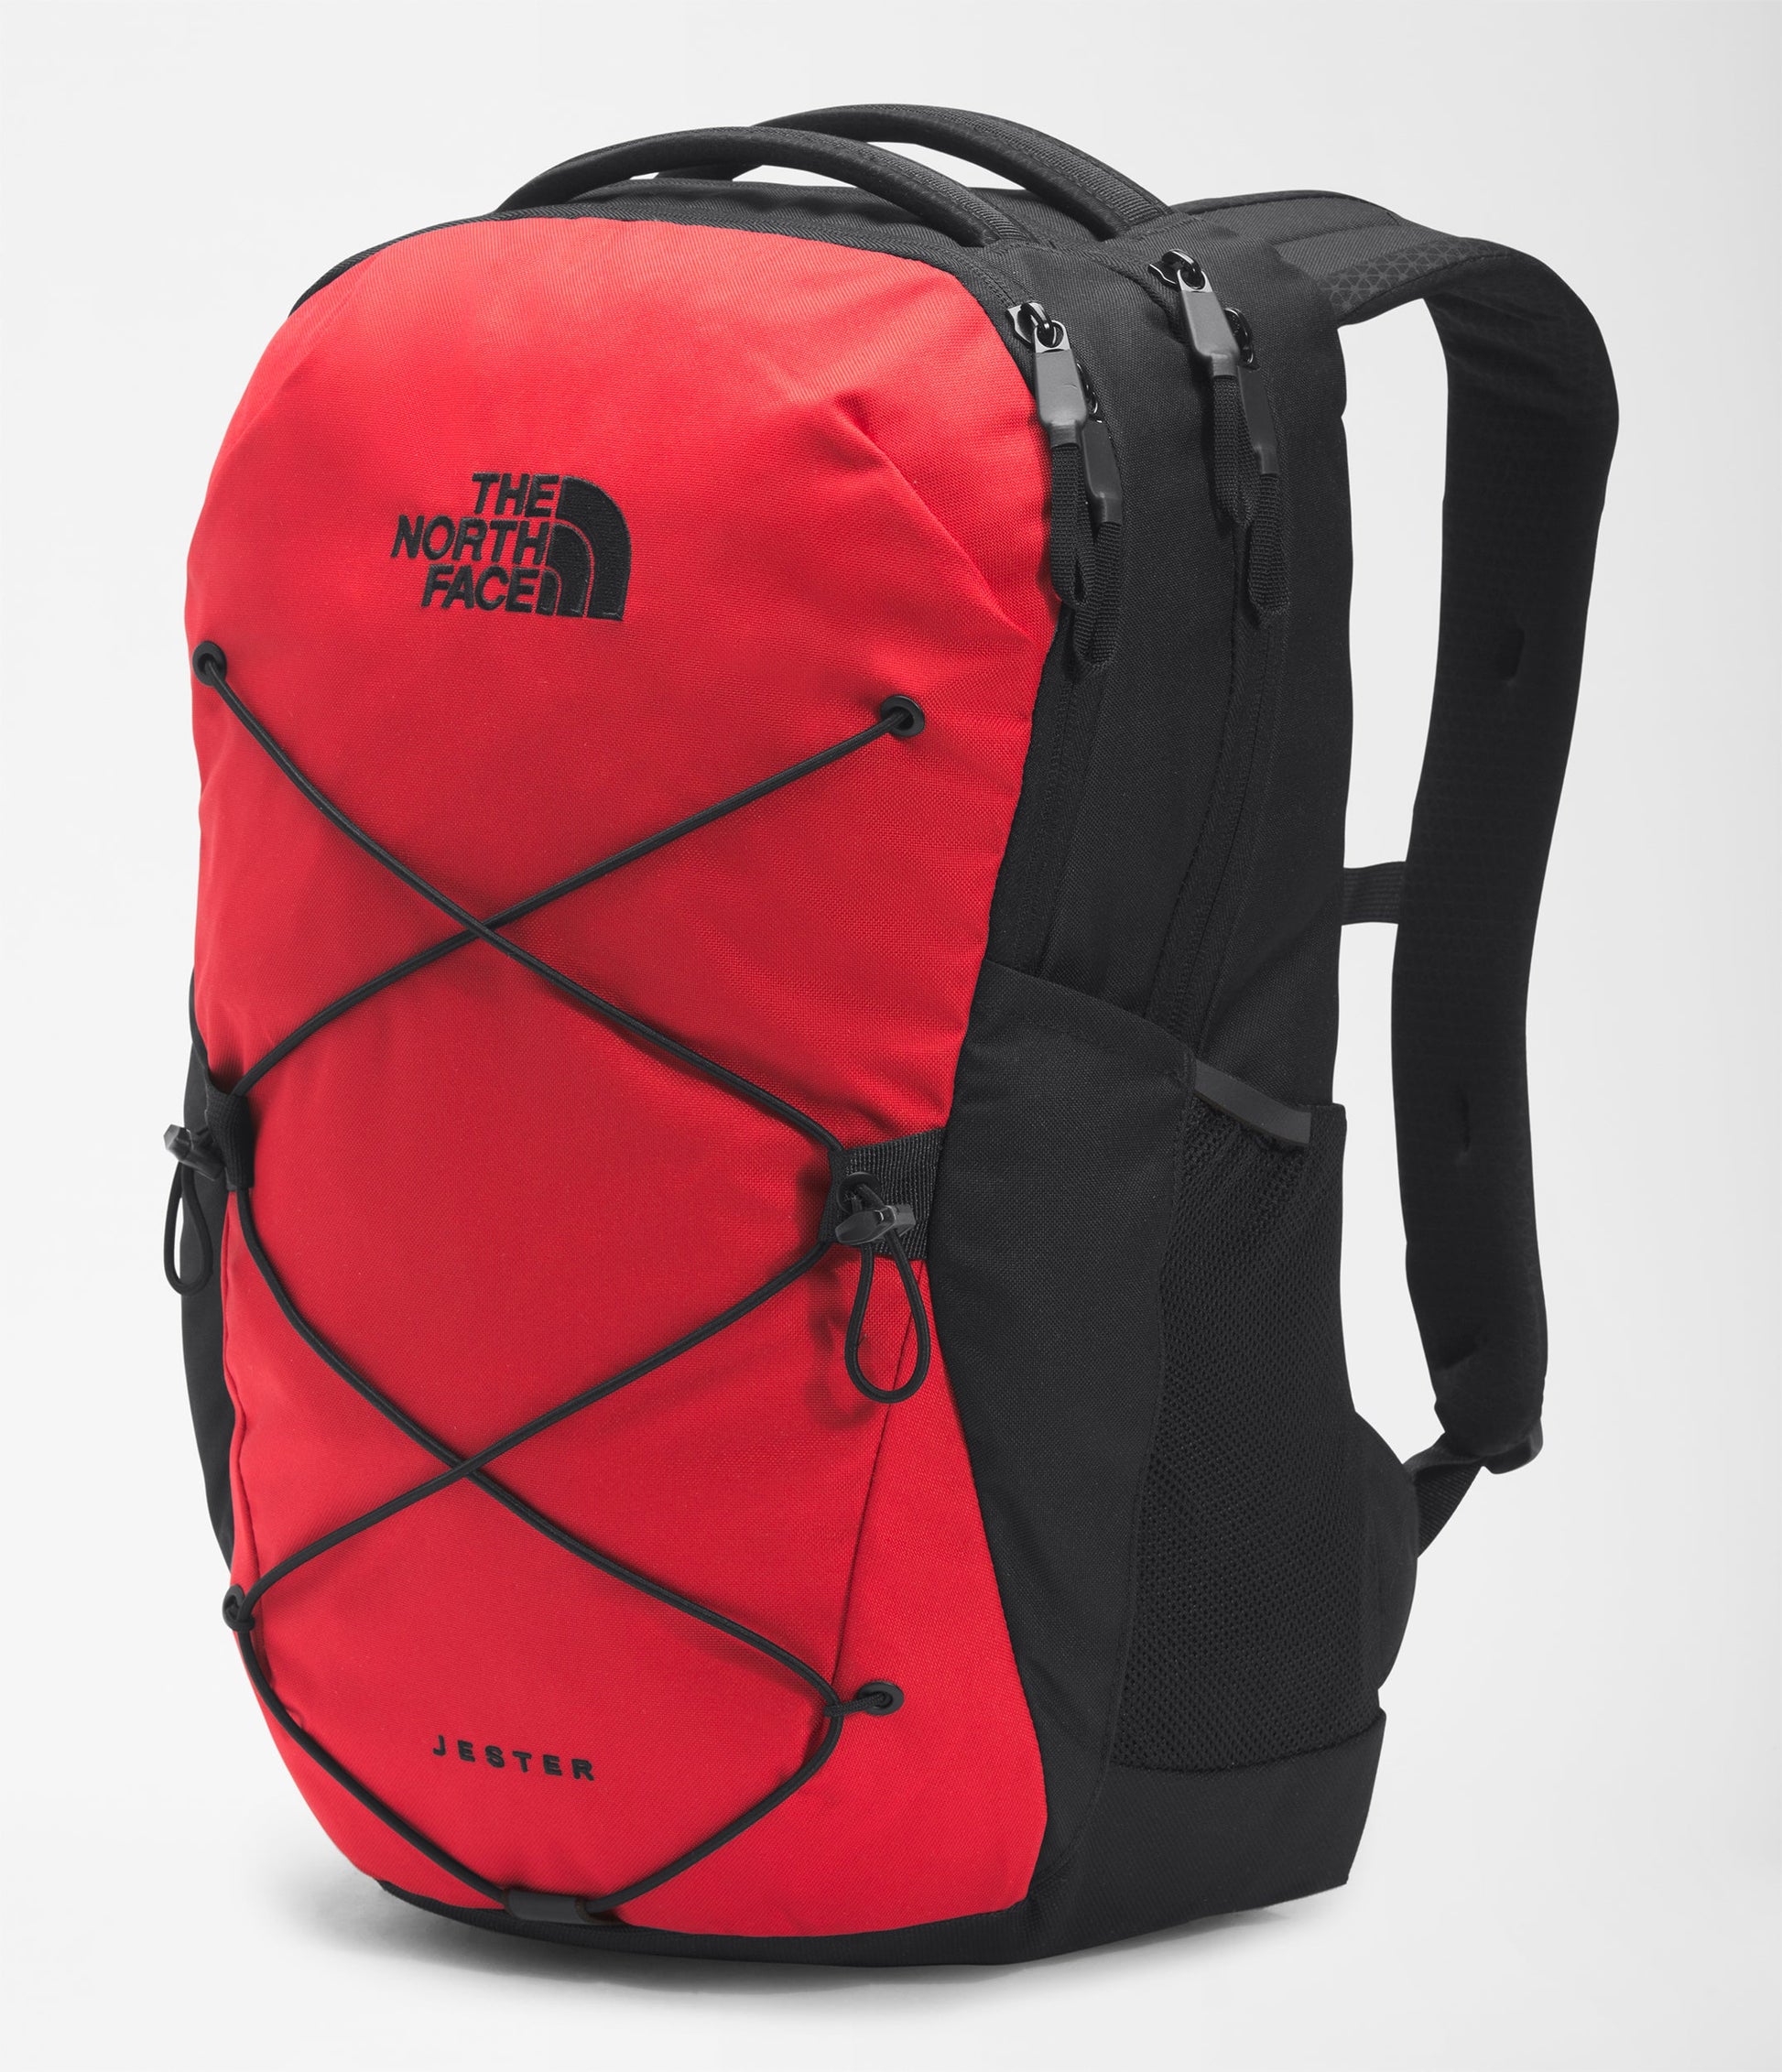 The North Face Jester Backpack - TNF Red/TNF Black